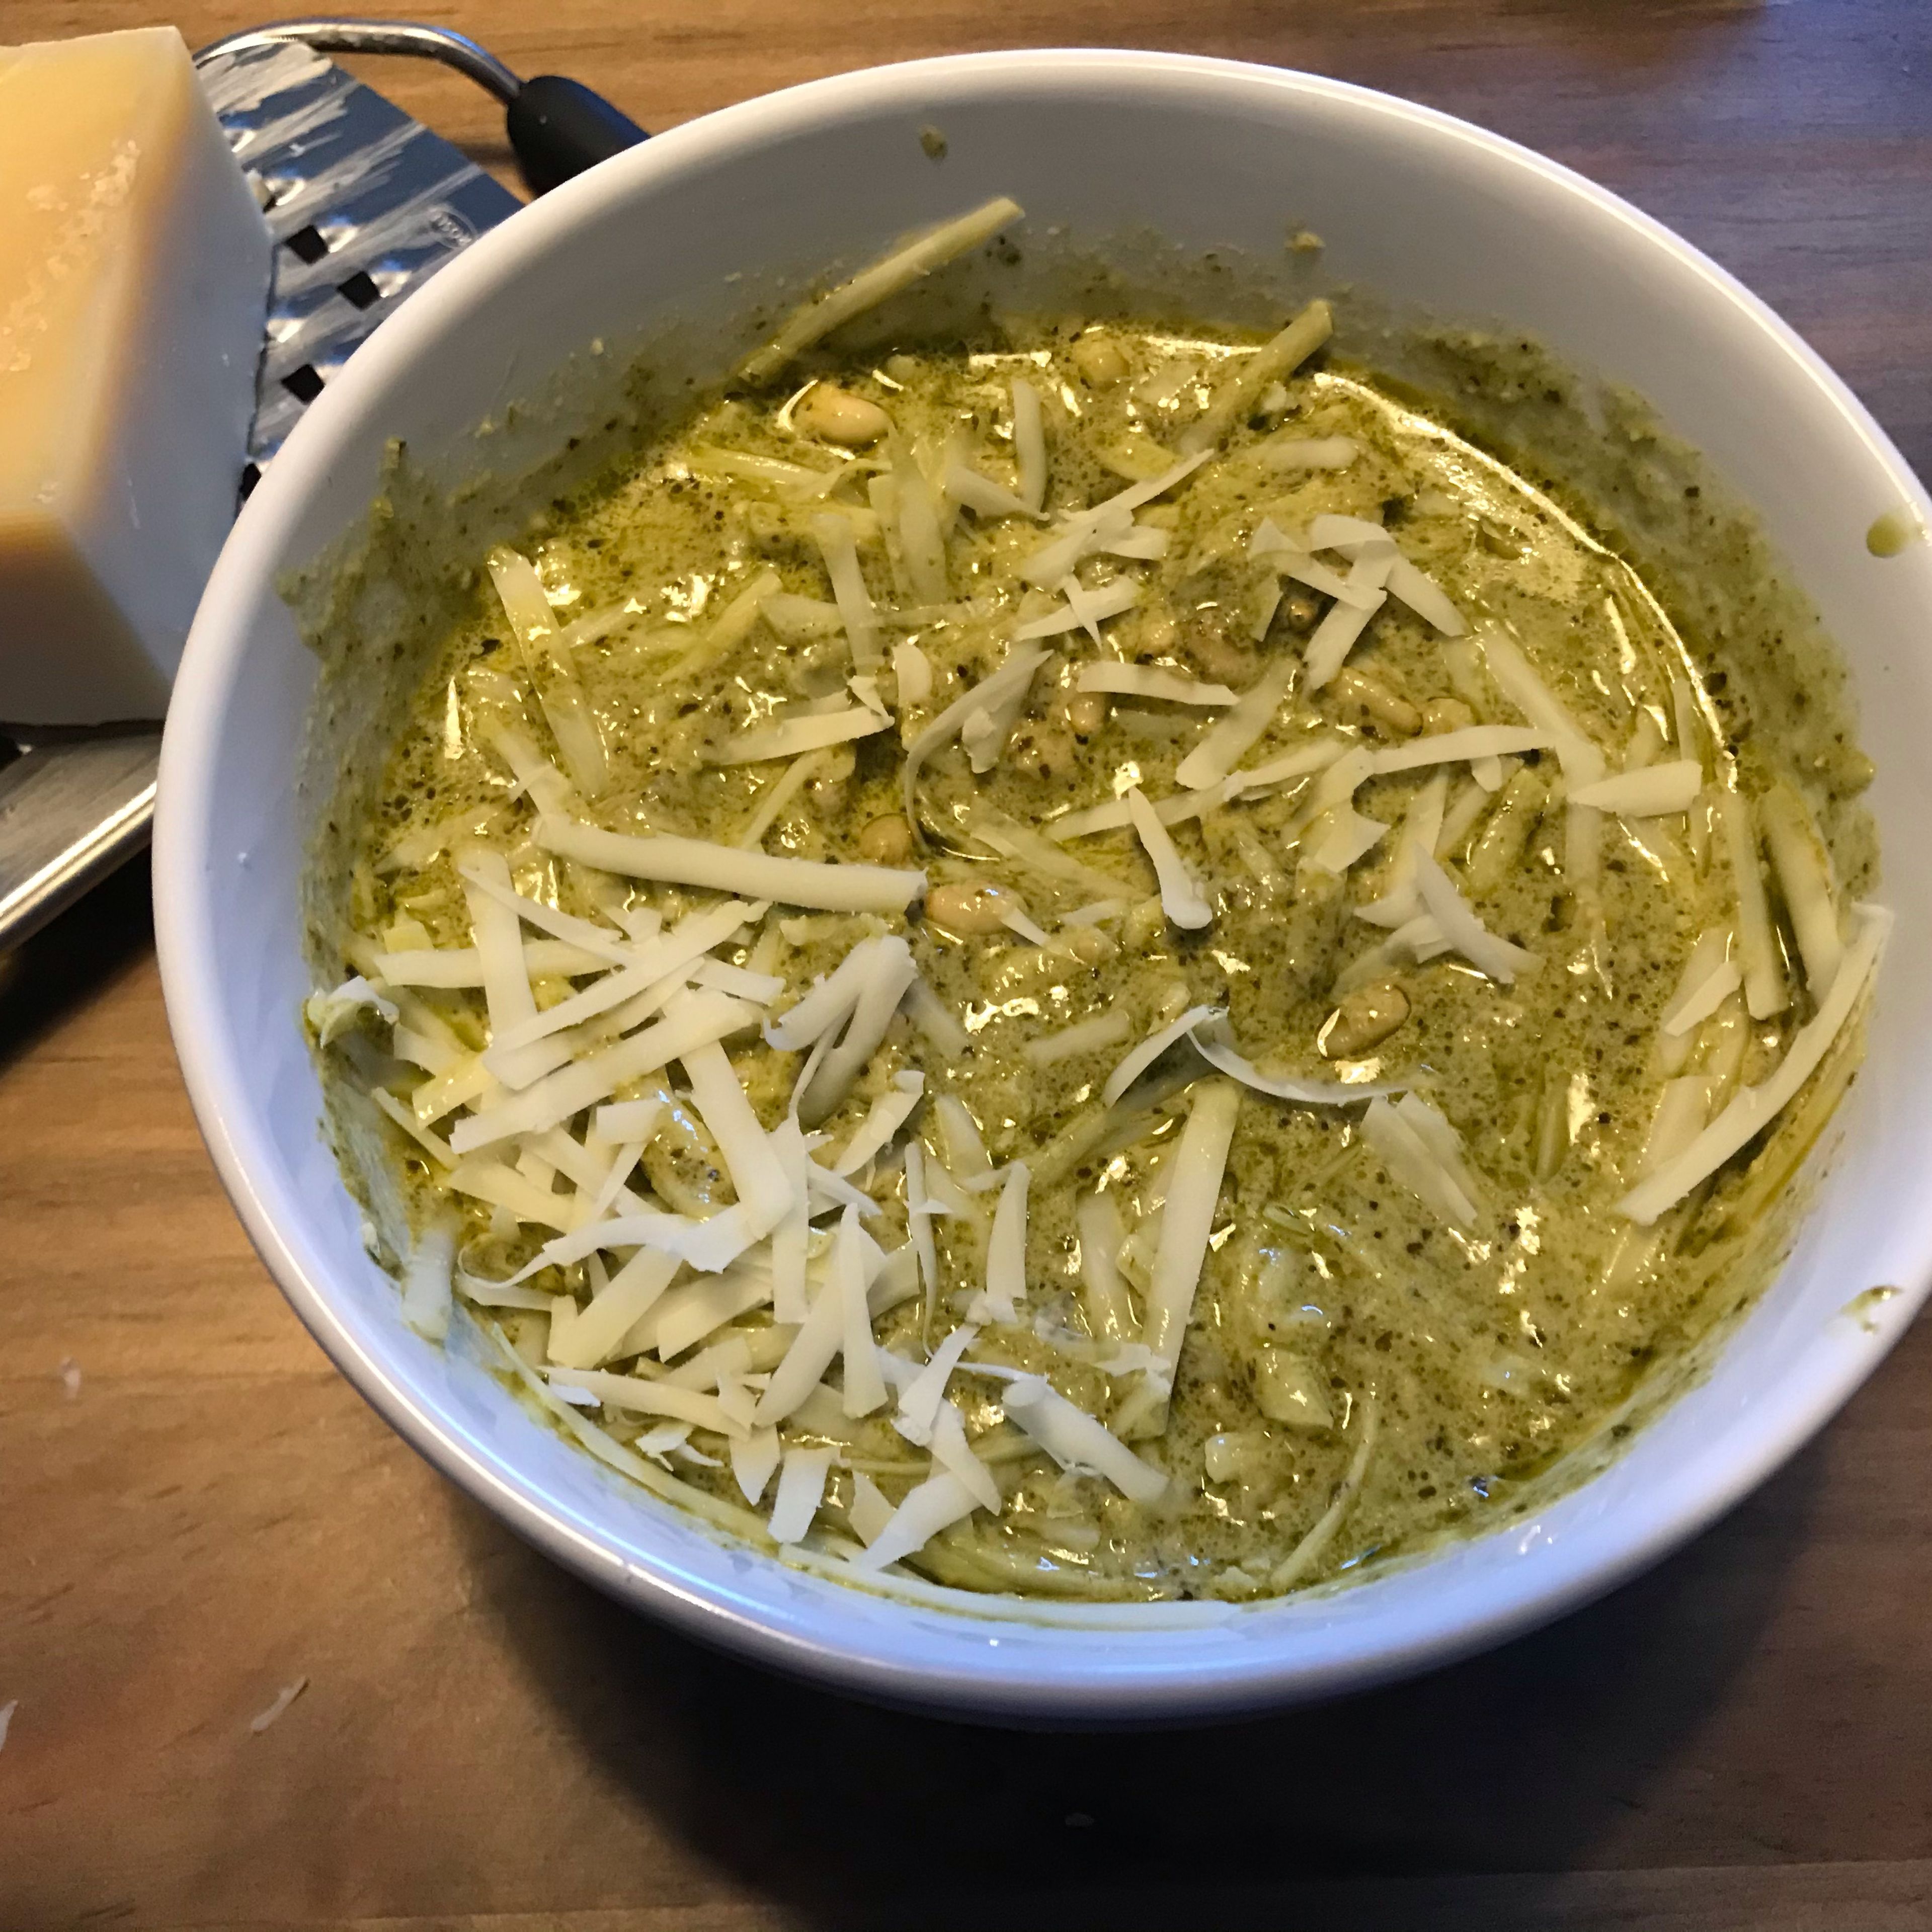 In a small bowl, add pesto, pine nuts and cream. Grate half of the cheese over the pesto and mix well.